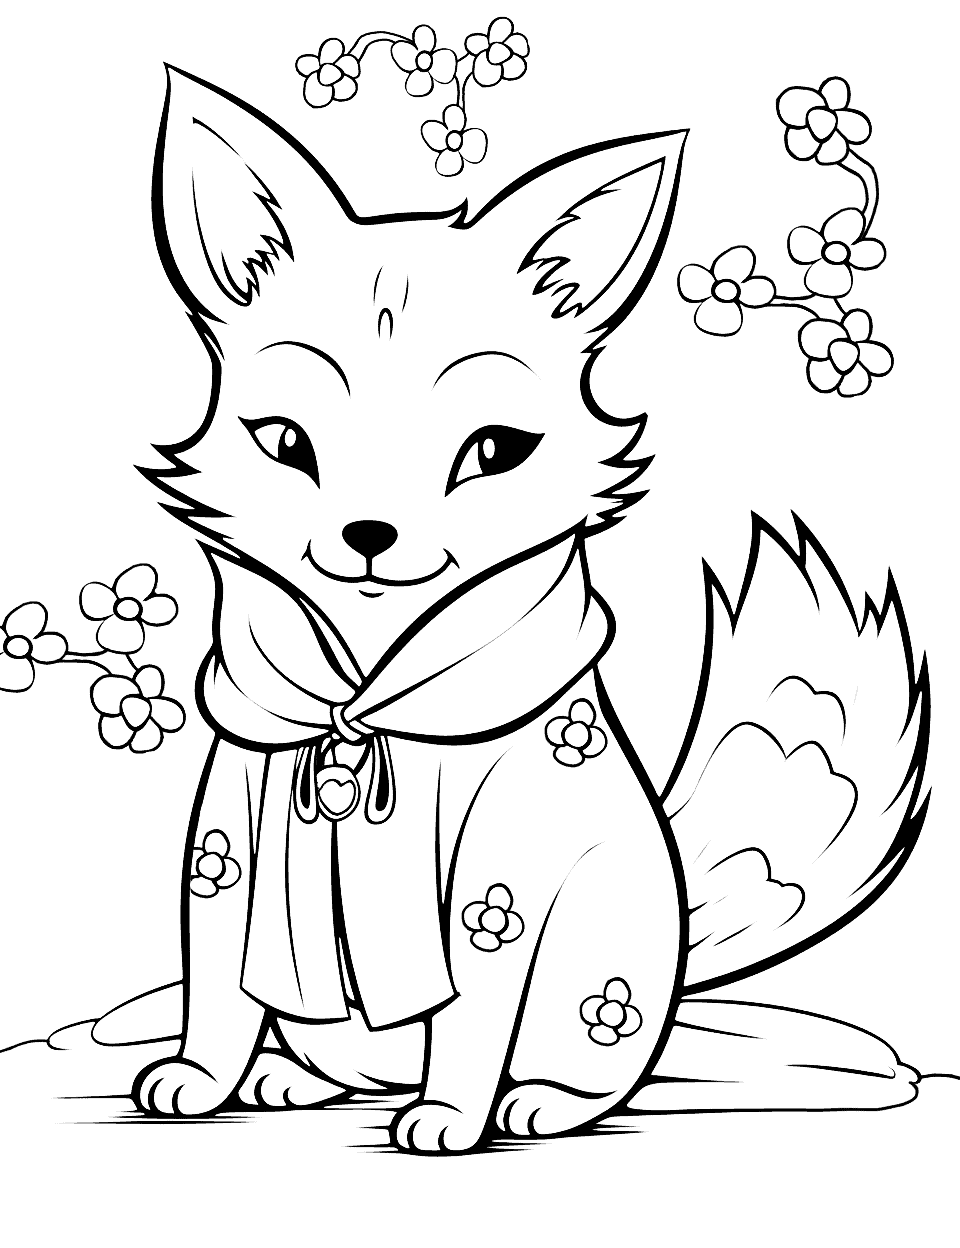 Fox in Kimono Coloring Page - A fox wearing a traditional Japanese kimono, surrounded by cherry blossoms.